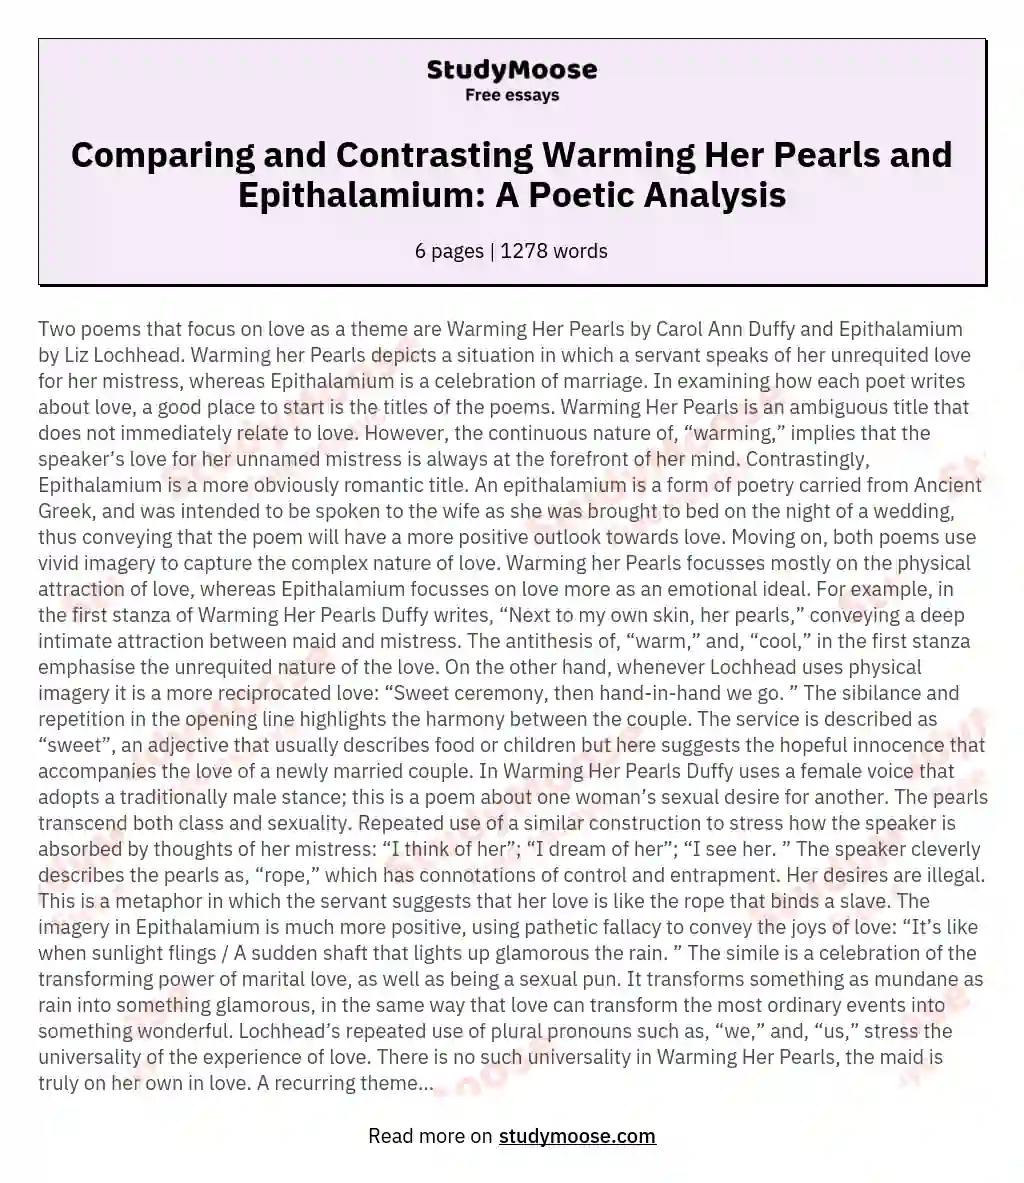 Compare and contrast two poems, Warming Her Pearls by Carol Ann Duffy and Epithalamium by Liz Lochhea